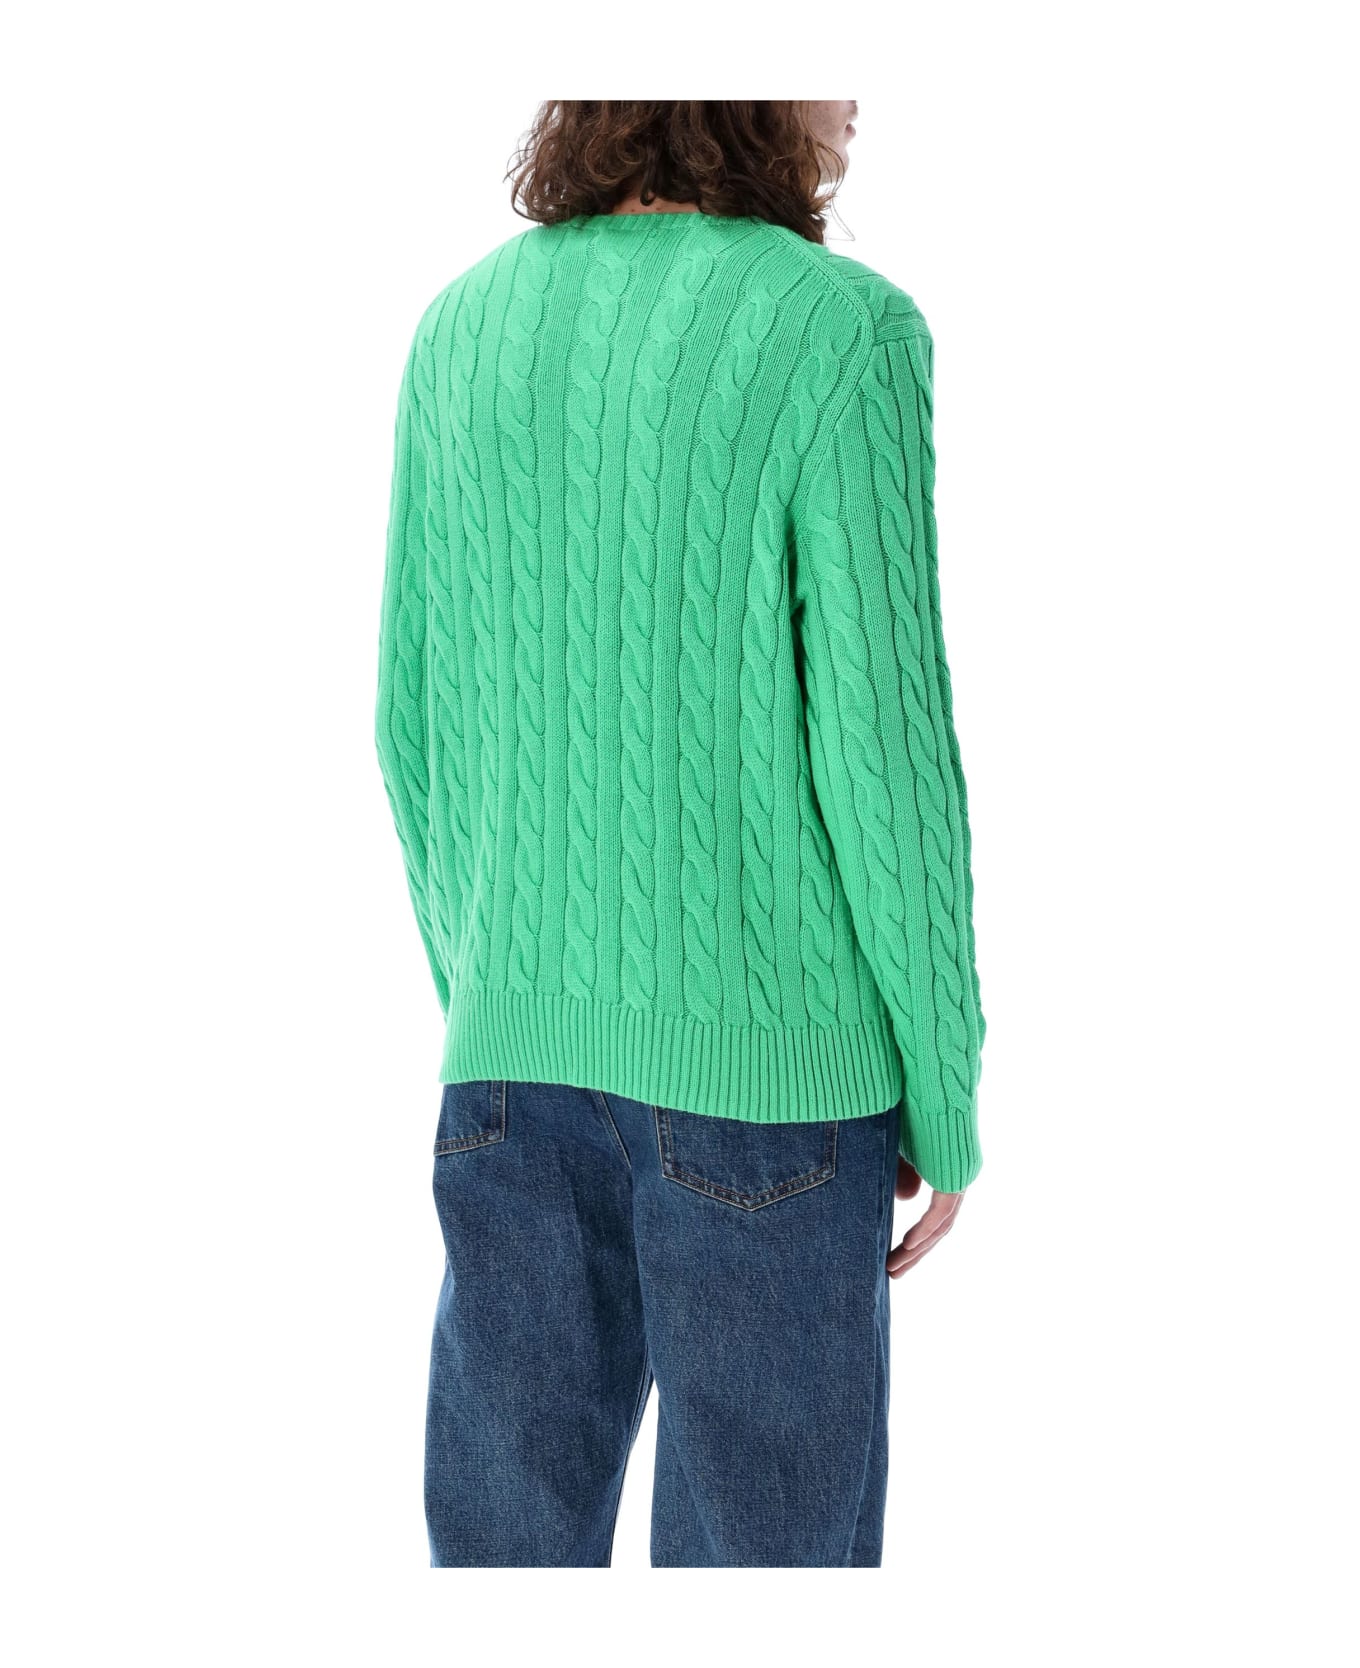 Polo Ralph Lauren Cable Knit Sweater - GREEN ニットウェア